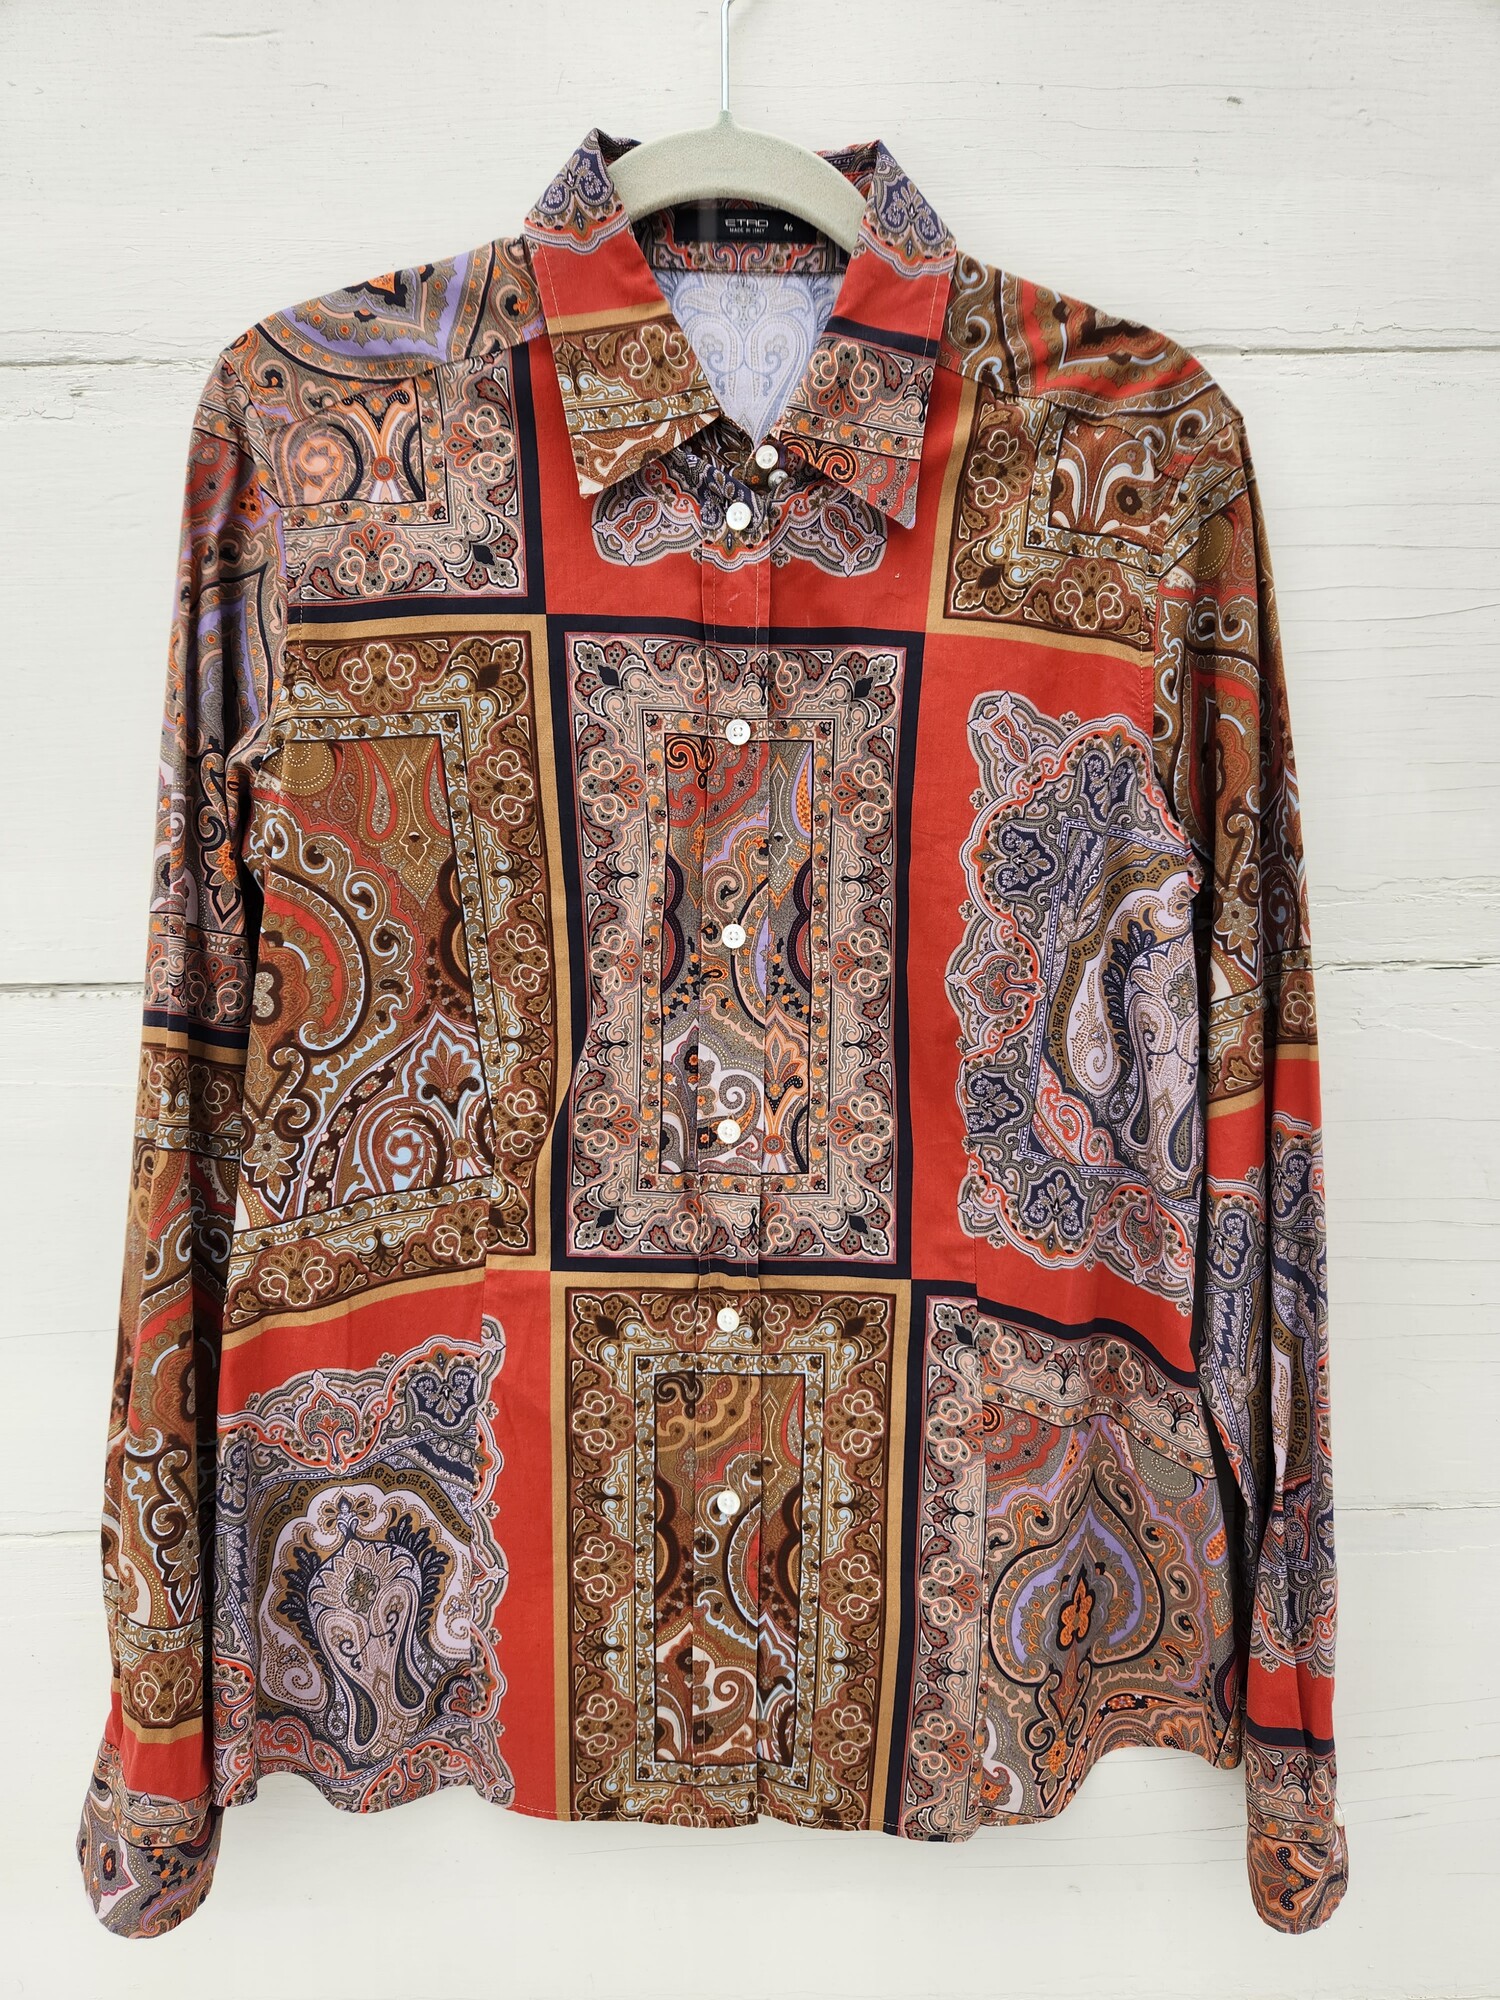 Etro Colored Block Paisley Dress Shirt Size 46
46 is roughly us 10
Pit to Pit 20 inches across
Pit down sleeve 20 inches
Waist 18.5 inches across
Hip 21.5 inches across
Down the back 28.75 inches
EUC
Retail $960